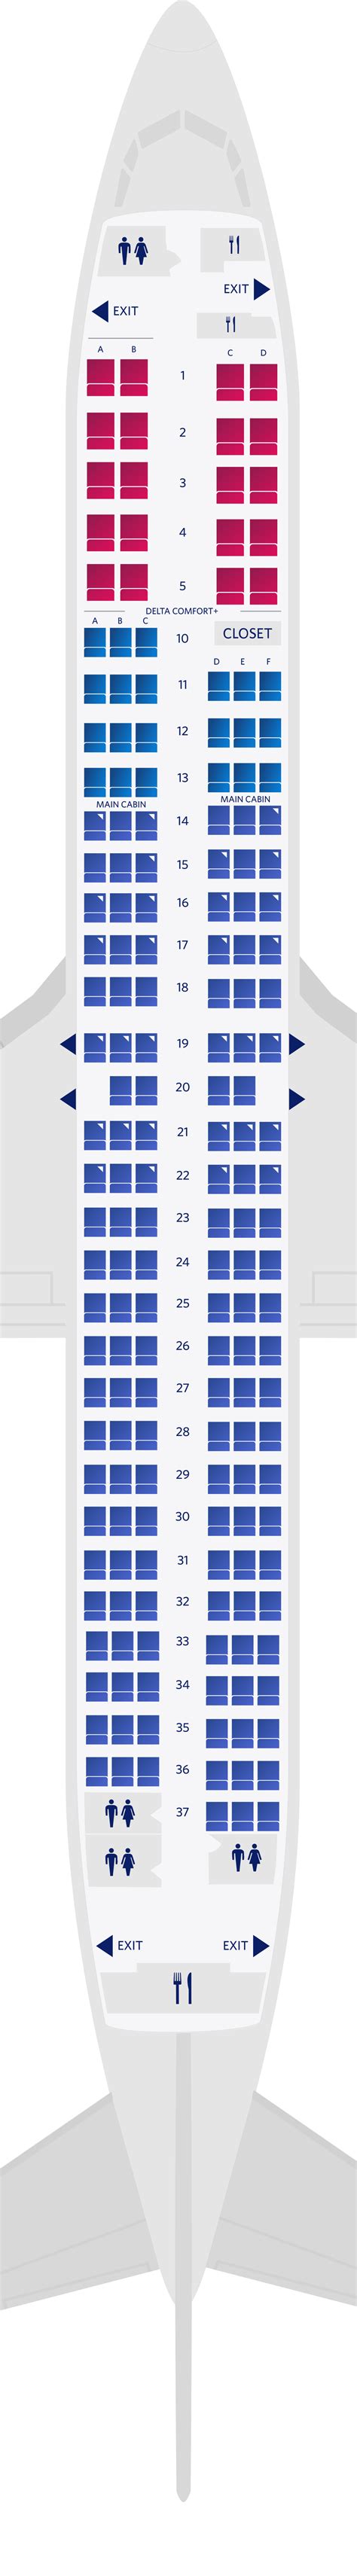 United Airlines Seat Map Boeing 737 800 Two Birds Home